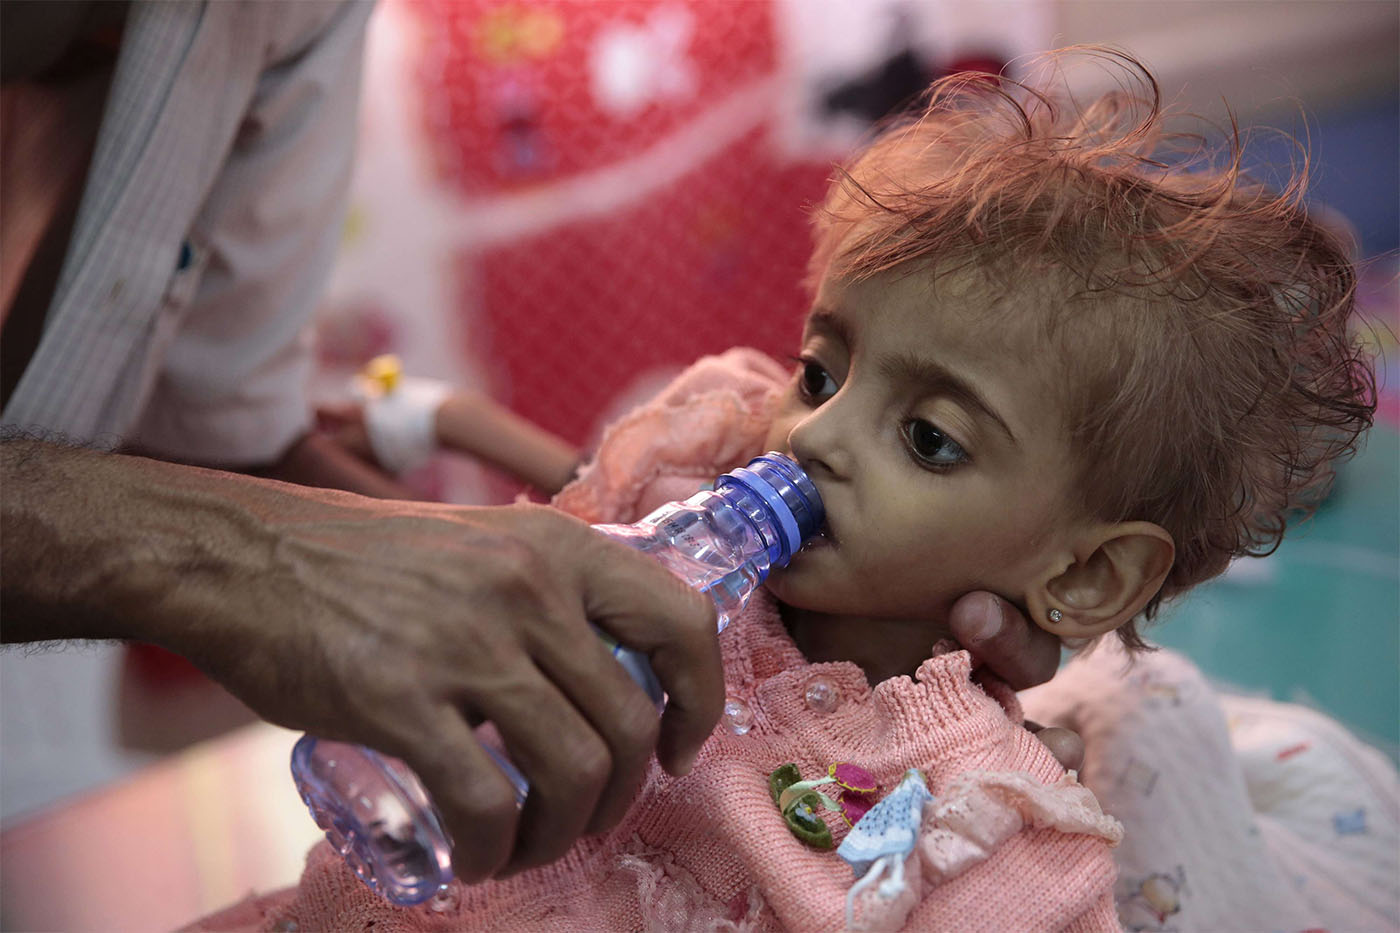 A father gives water to his malnourished daughter at a feeding center in a hospital in Hodeidah